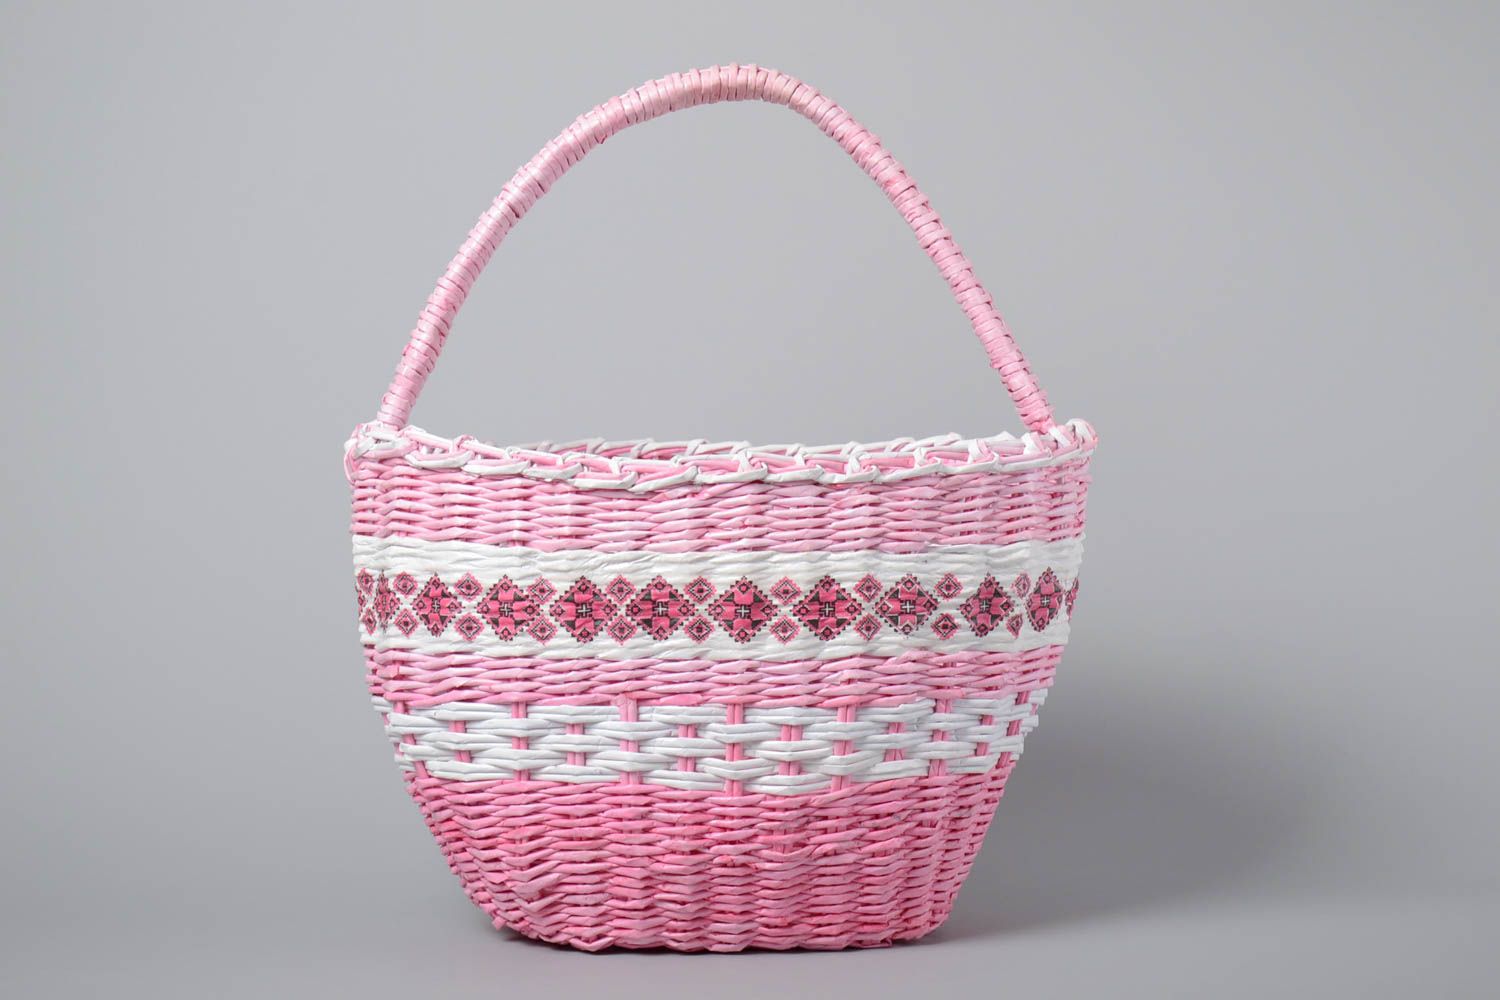 Woven basket made of paper rod small pink with white handmade photo 3